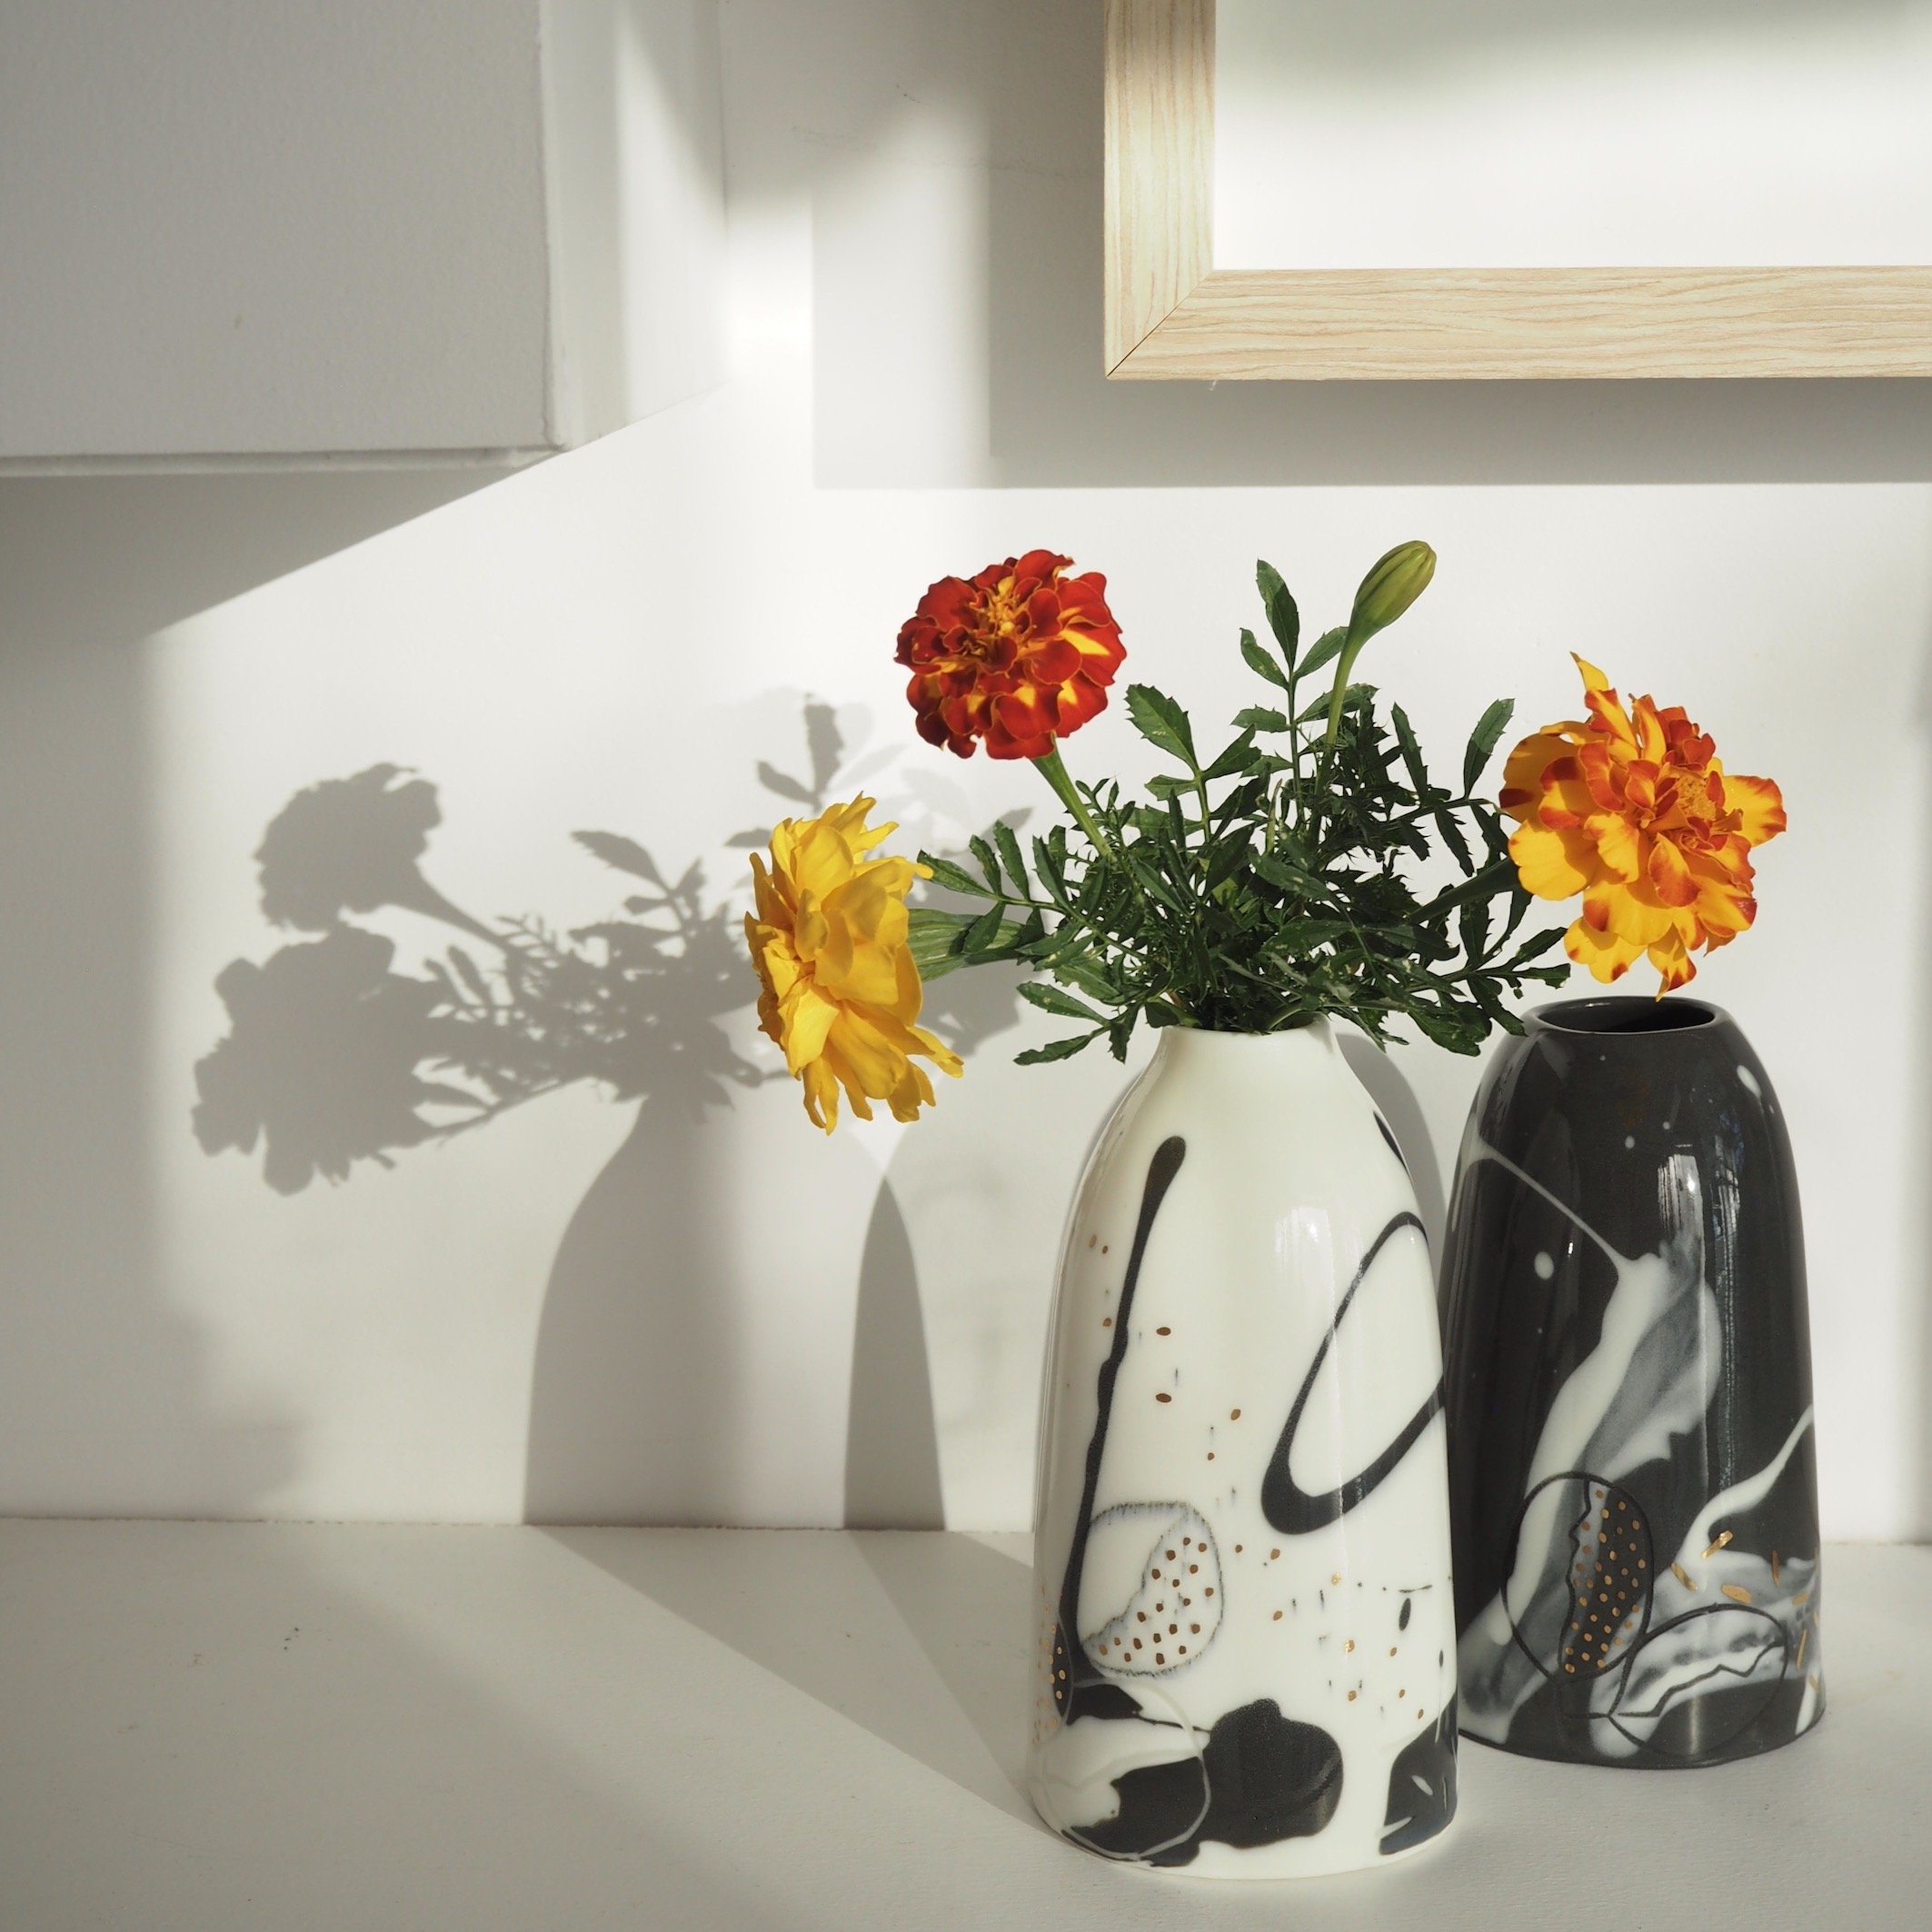 GOST Tania Vrancic Freedom Gold blk and white bud vases in afternoon light low res.jpg